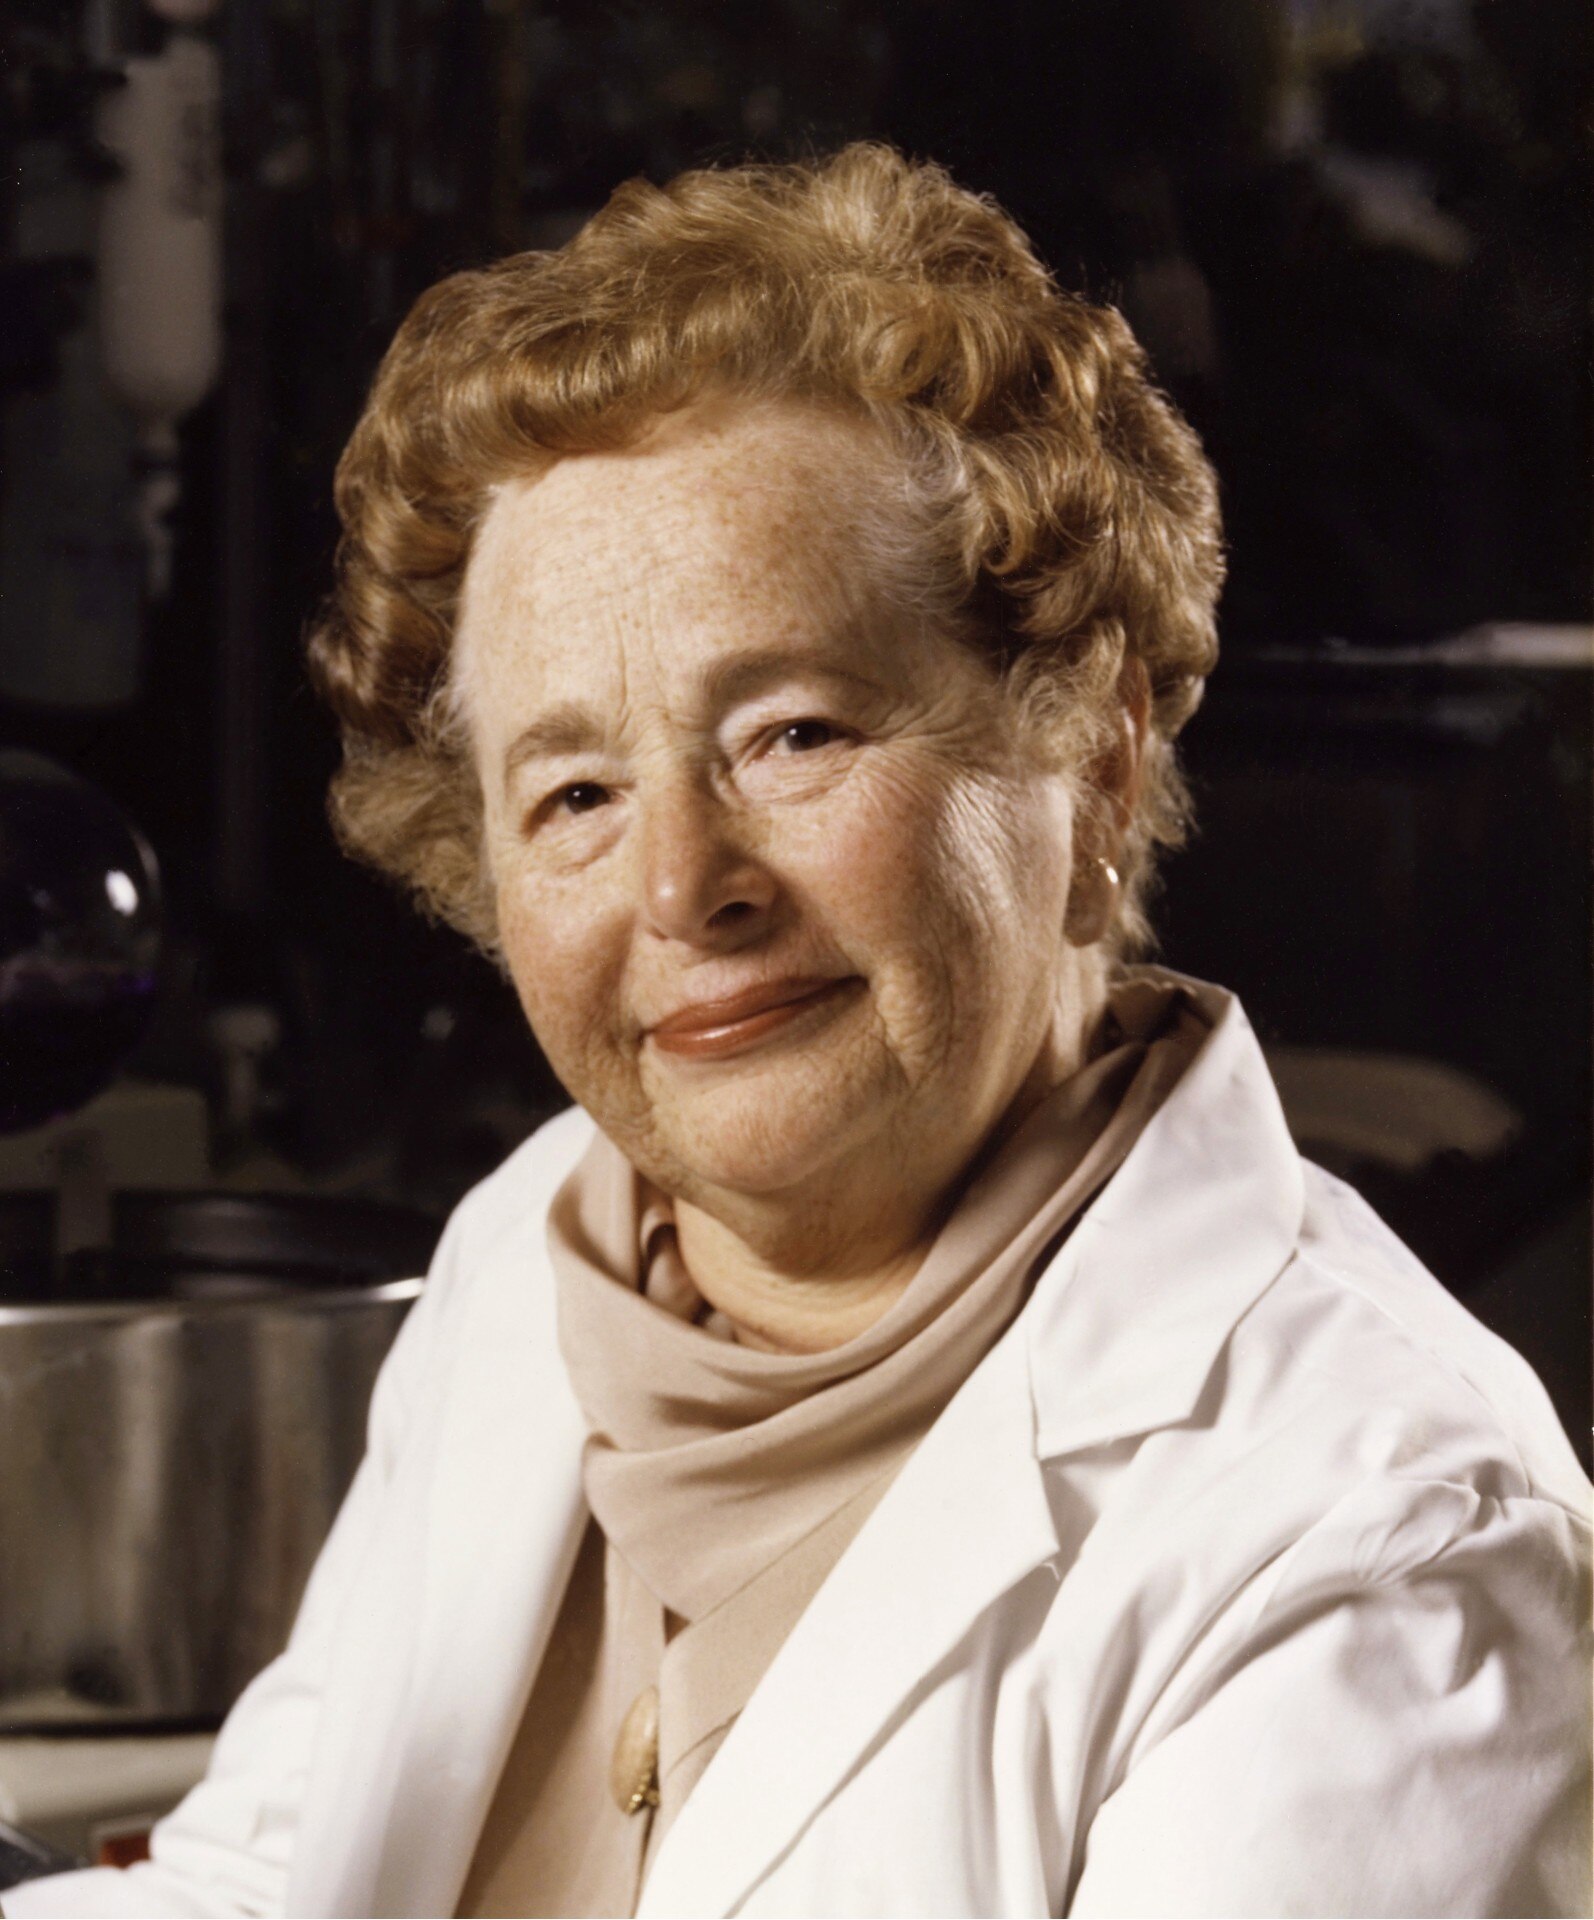 An older woman with short permed hair and white lab coat